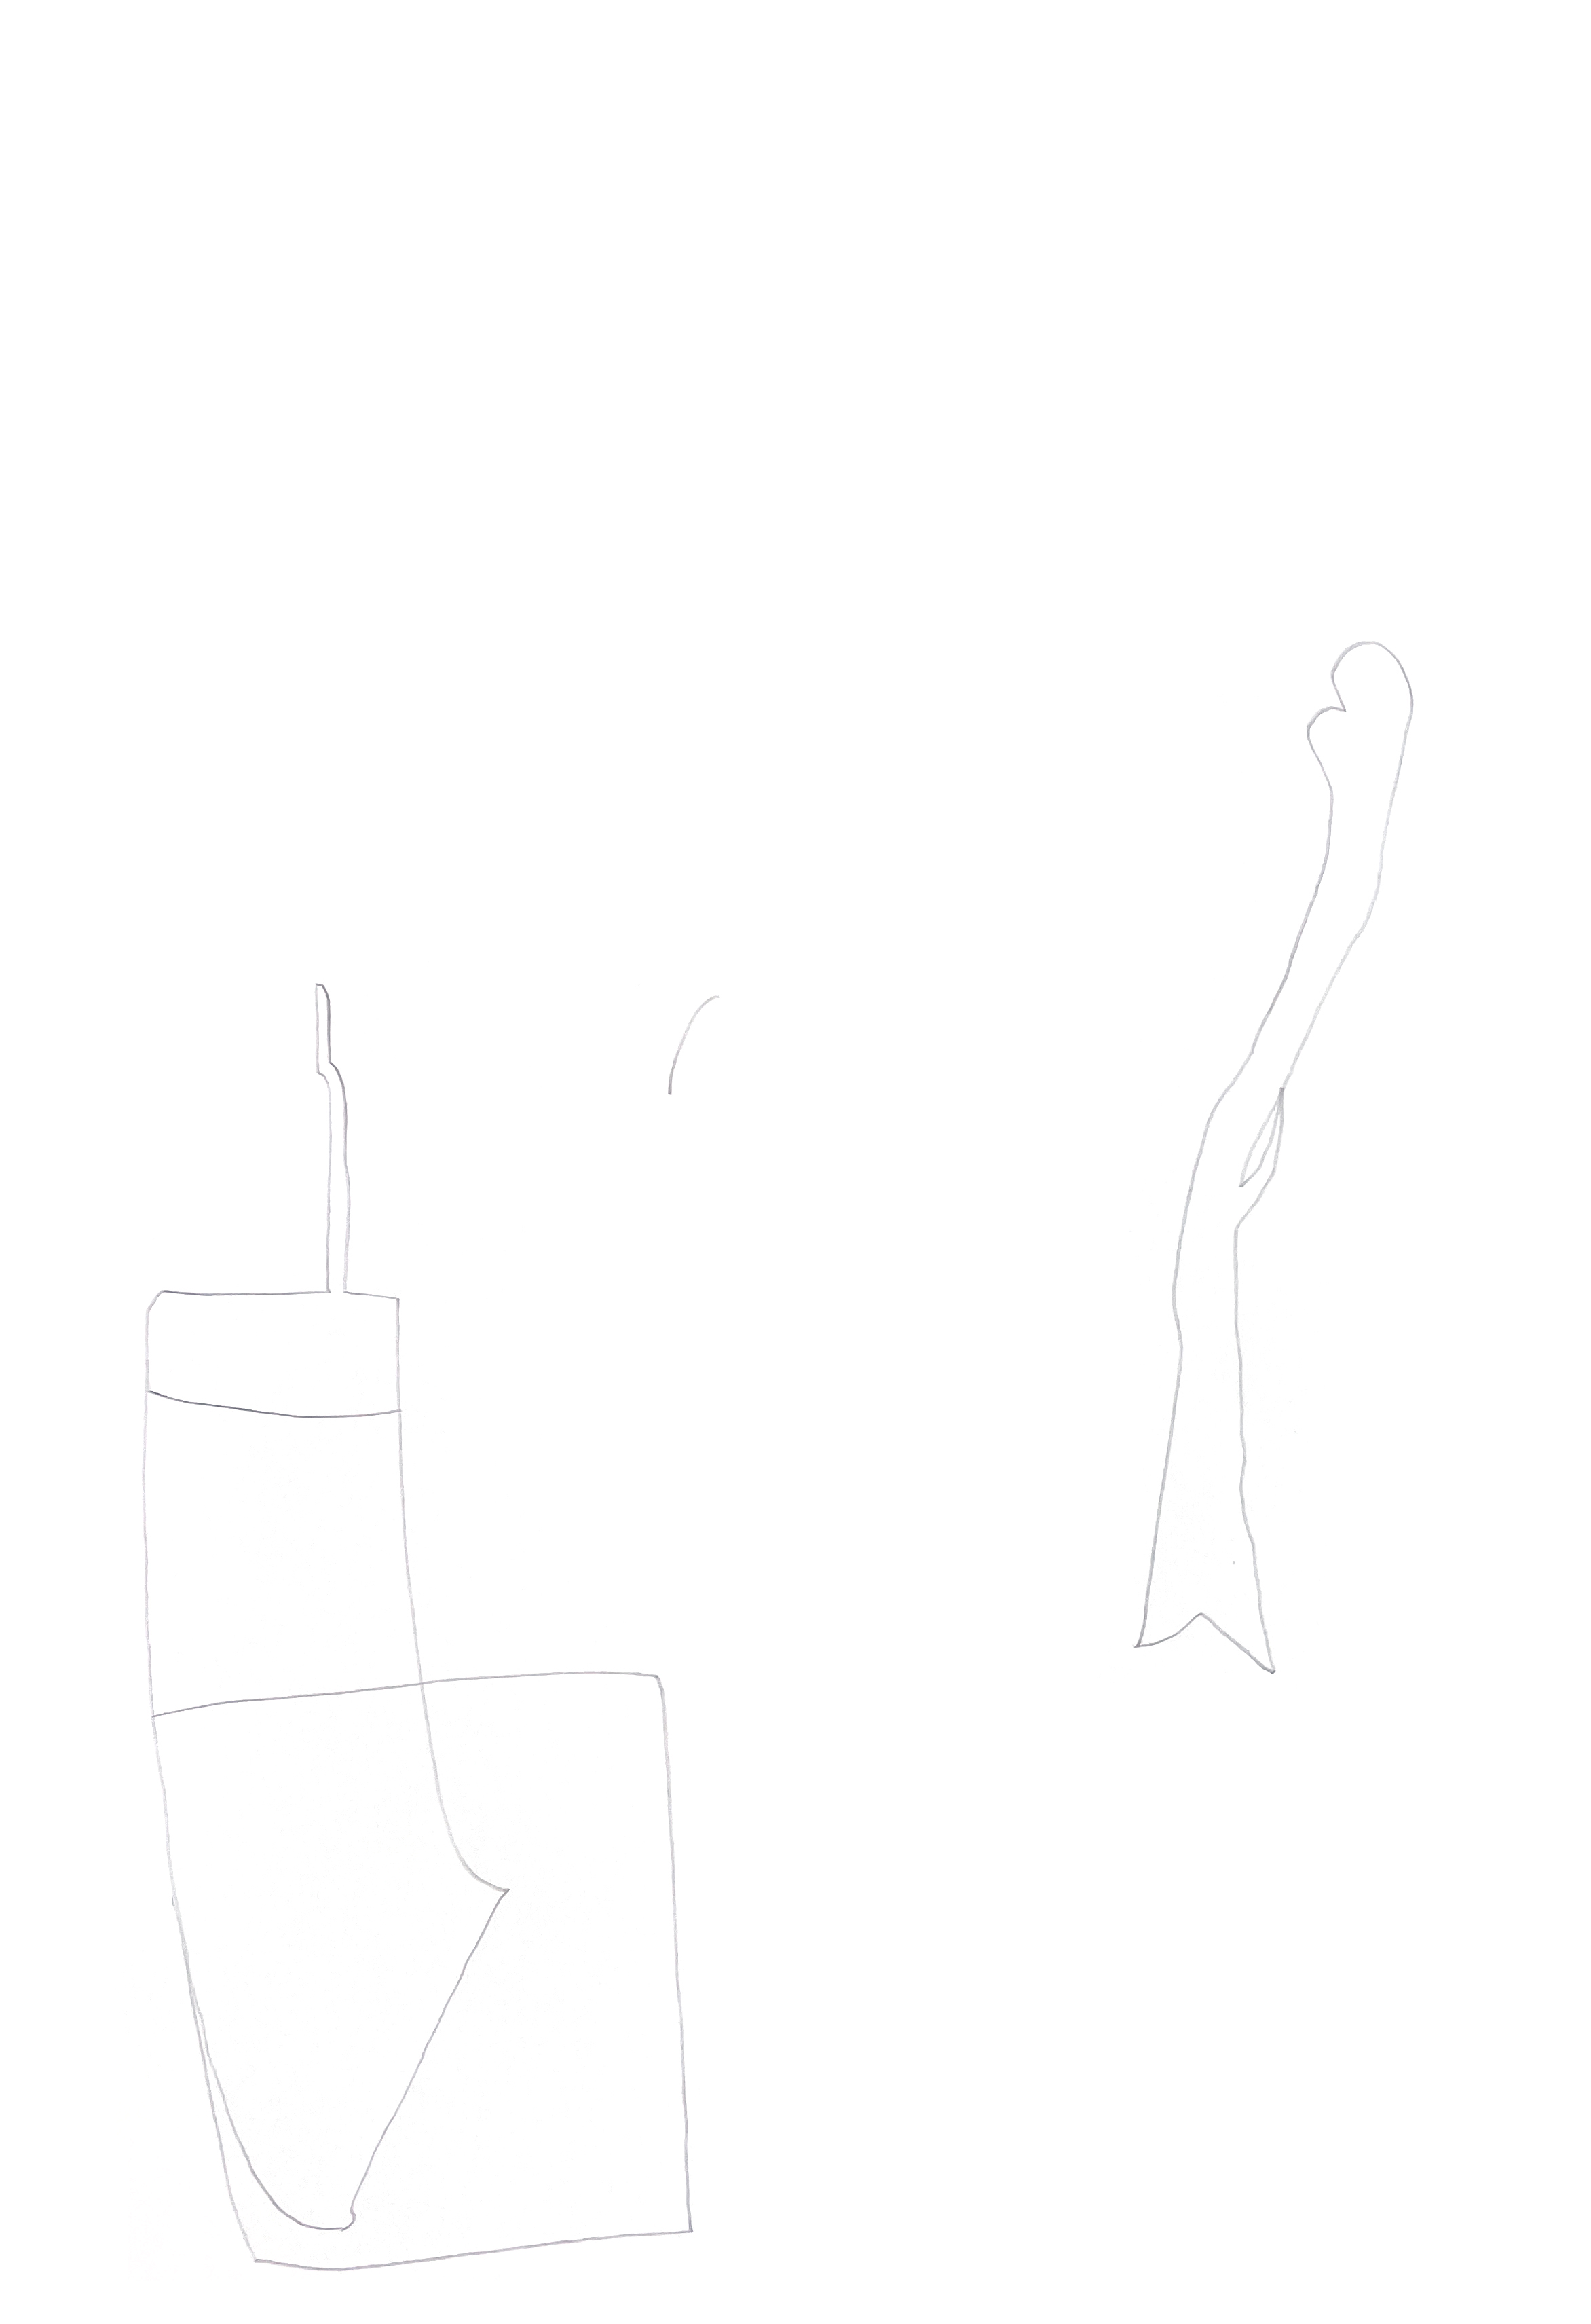 pencil drawing of a steampipe and a bone with the tail of a fish